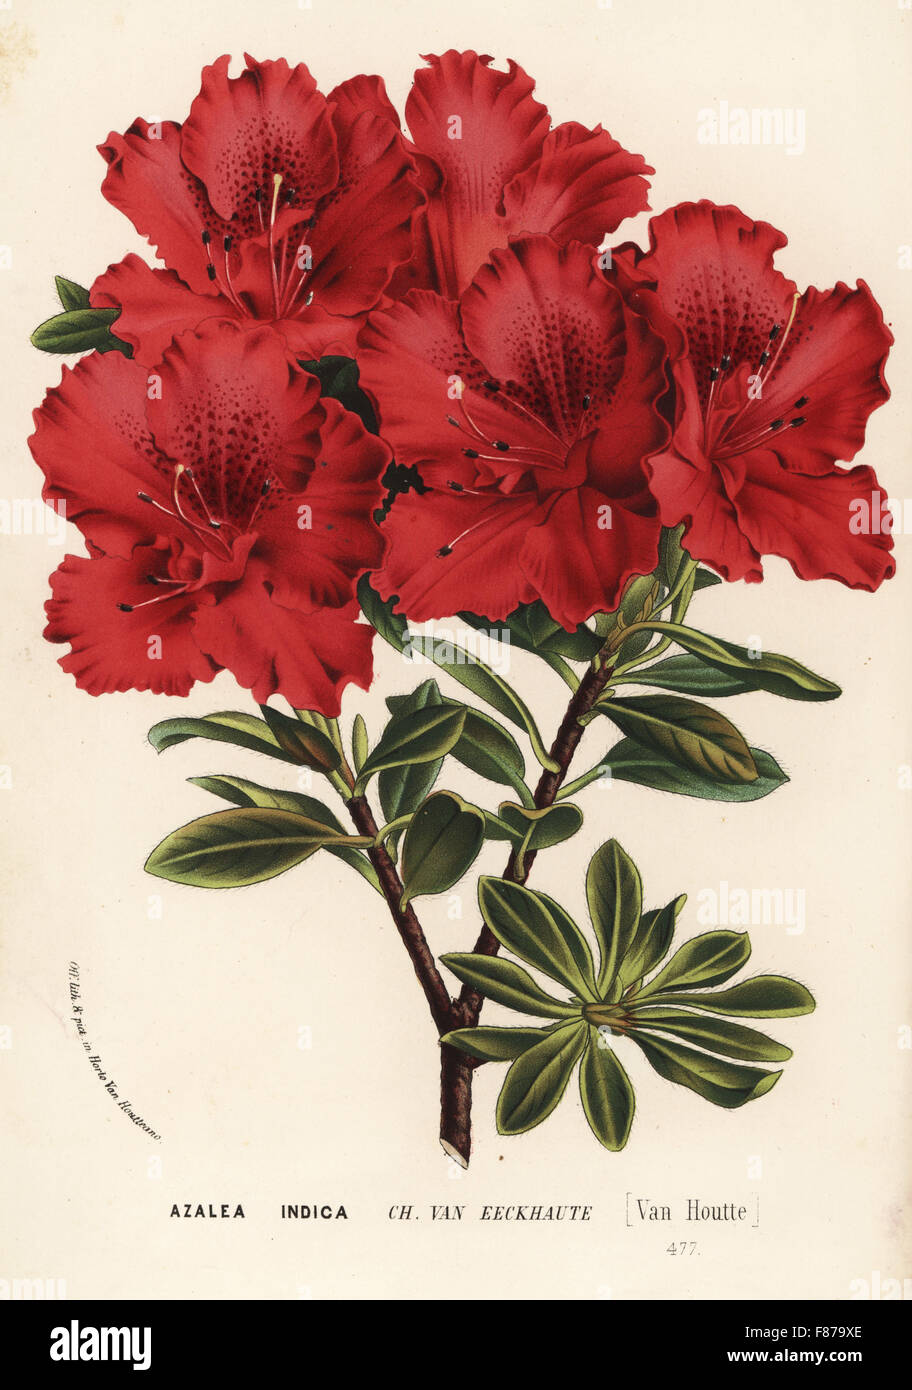 Azalea cultivar, Charles van Eeckhaute, Rhododendron indicum. Handcoloured lithograph from Louis van Houtte and Charles Lemaire's Flowers of the Gardens and Hothouses of Europe, Flore des Serres et des Jardins de l'Europe, Ghent, Belgium, 1862-65. Stock Photo